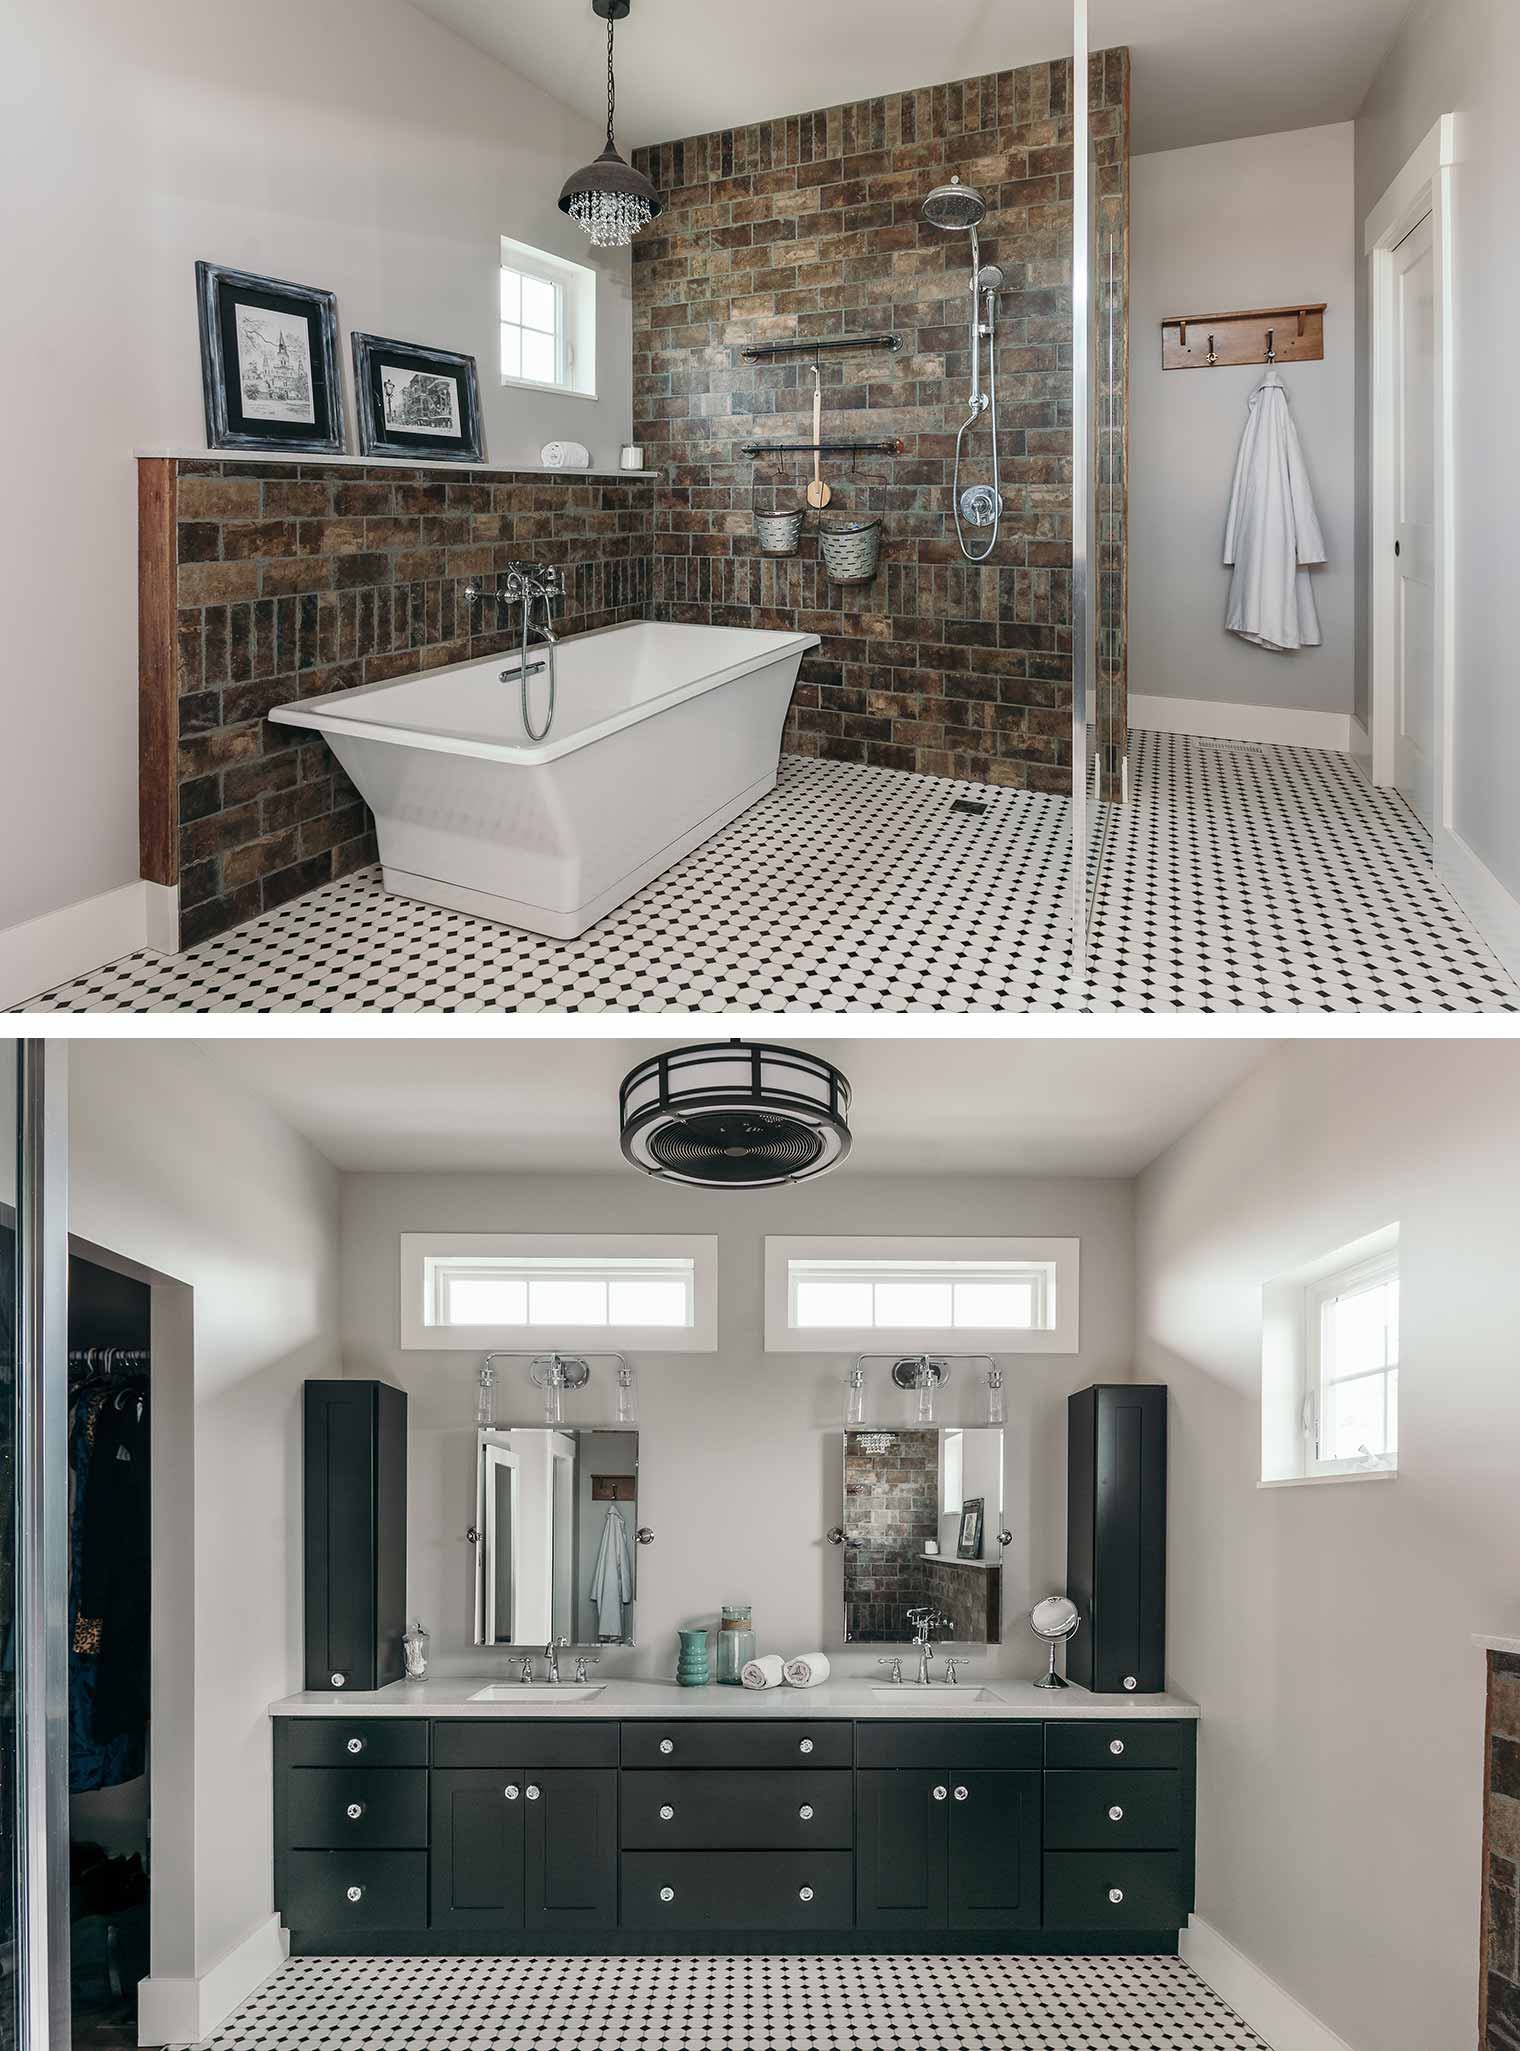 Master bathroom in barn style custom new home in St. Charles, Iowa features brick look walls tile, free standing tub, open shower water closet, classic black and white floor tile, industrial ceiling fan and onyx double vanity, all designed and built by Silent Rivers of Des Moines